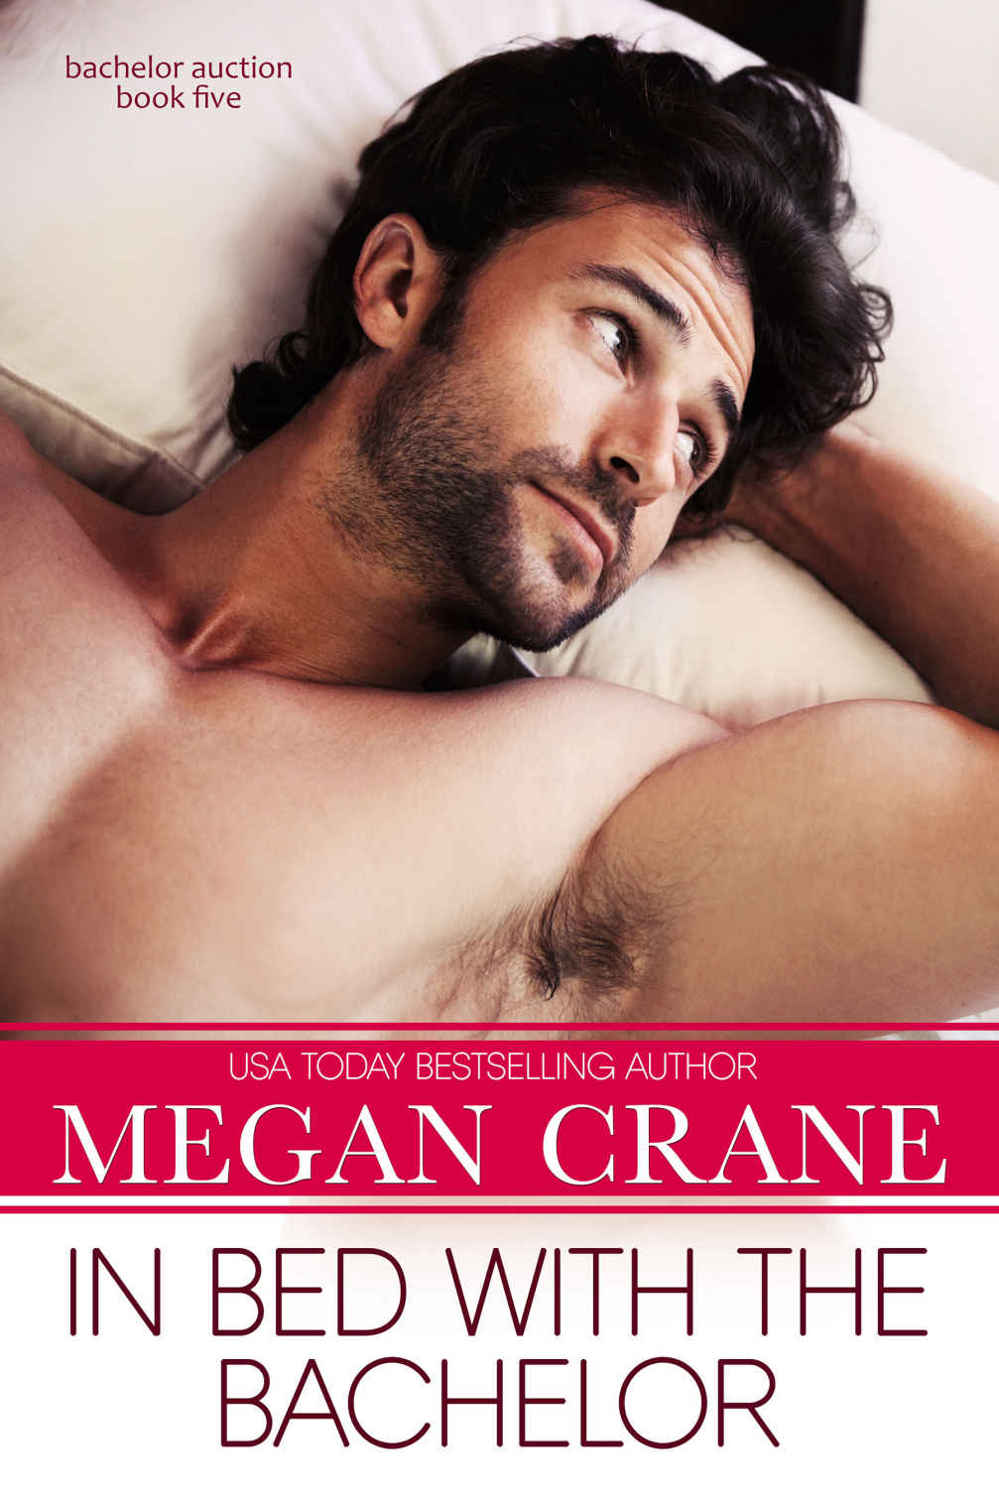 In Bed with the Bachelor (Bachelor Auction Book 5) by Megan Crane